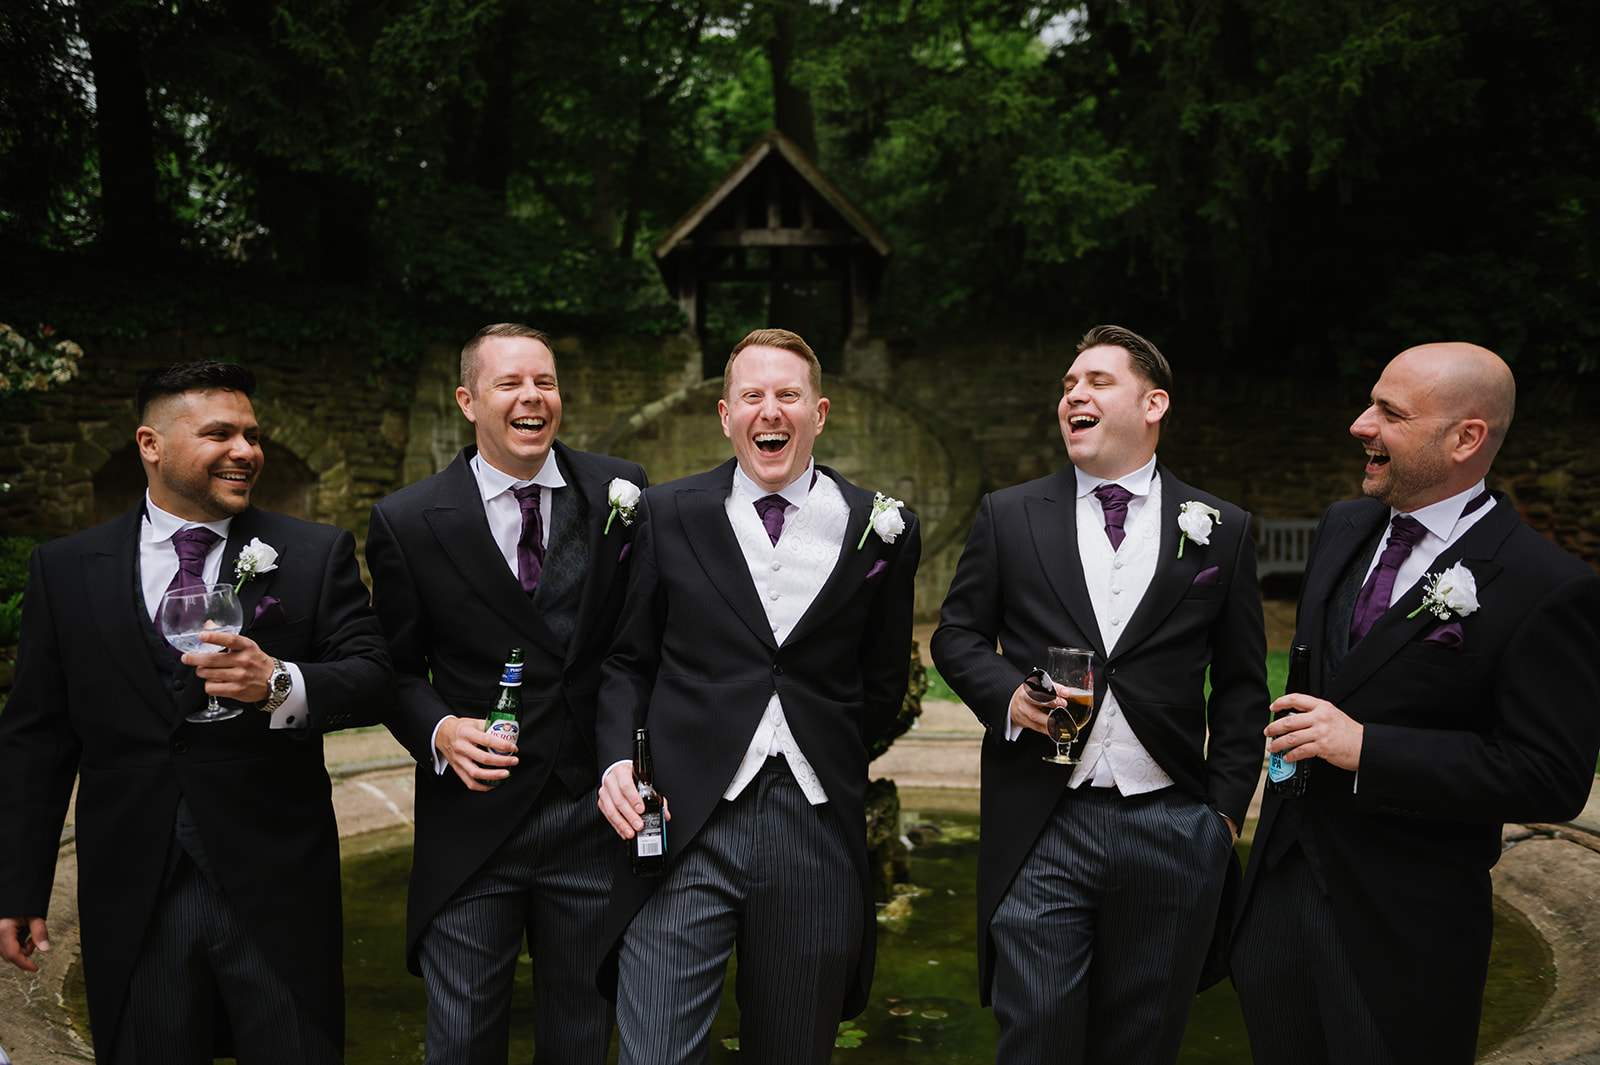 groom and groomsmen in matching suits laughing together before the wedding ceremony